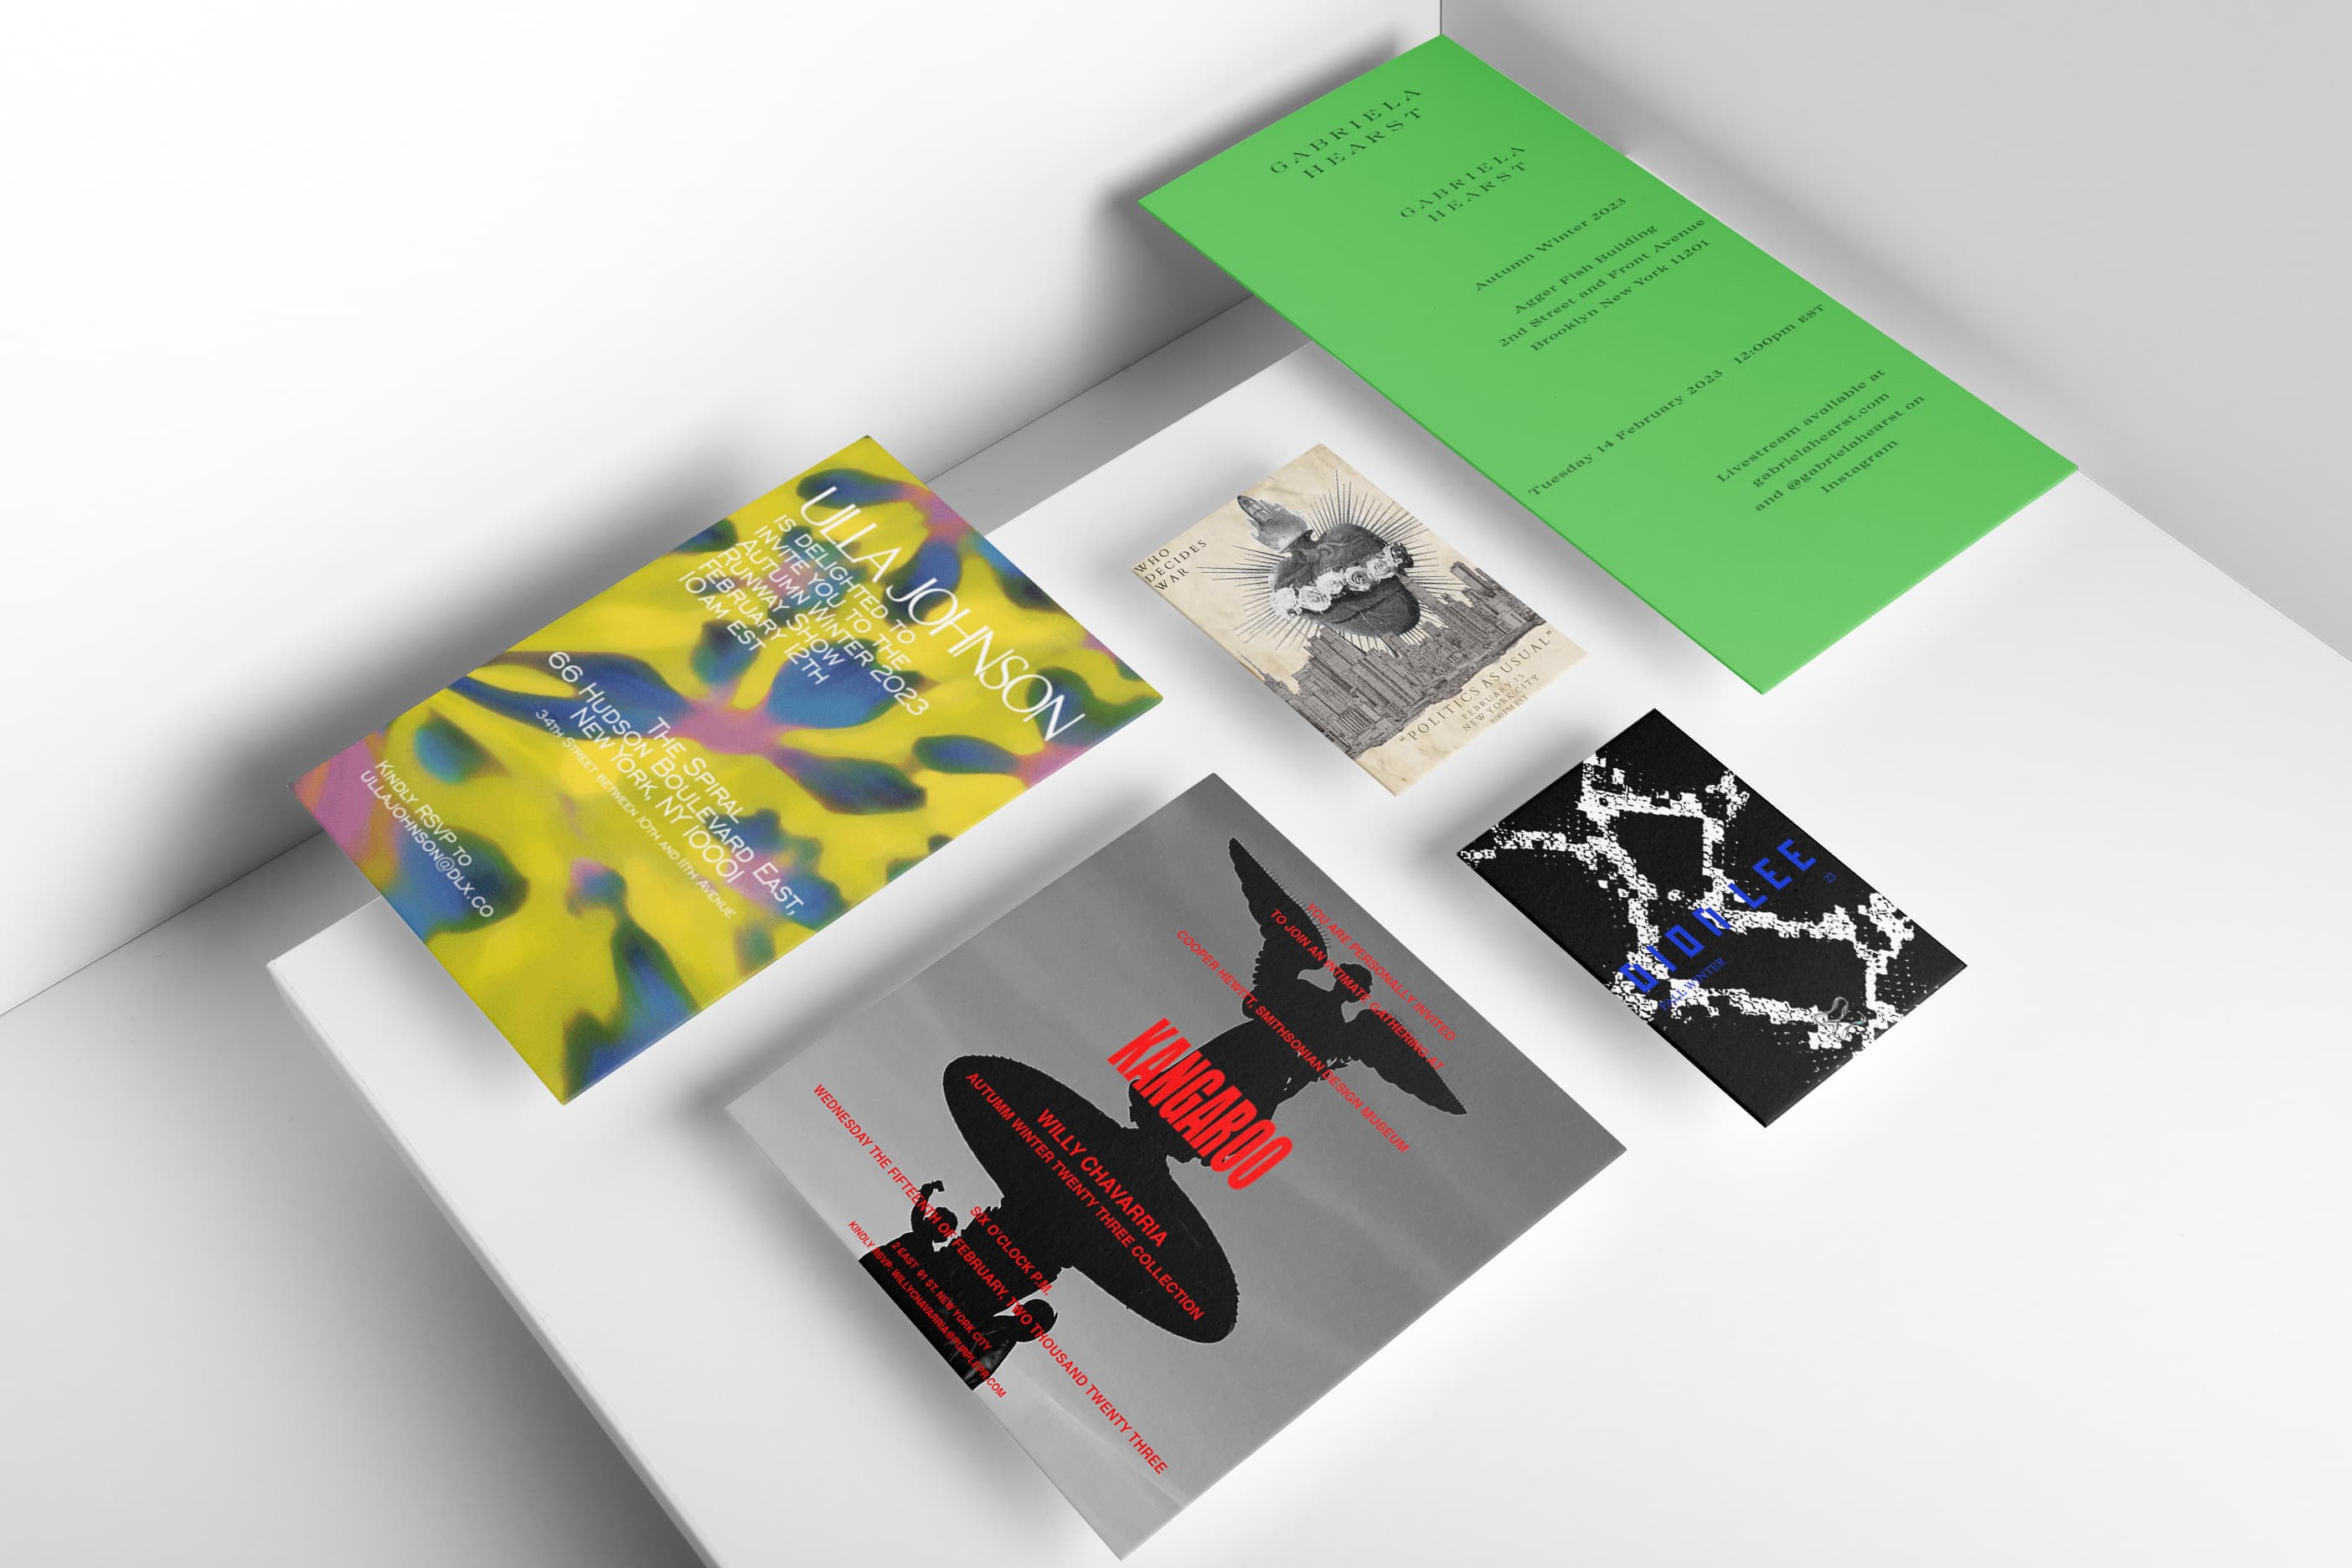 Beast invitation for New York fall 2023 fashion shows header image with invites from Gabriela Hearst, Dion Lee, Ella Johnson, Kangaroo and Who Decides War